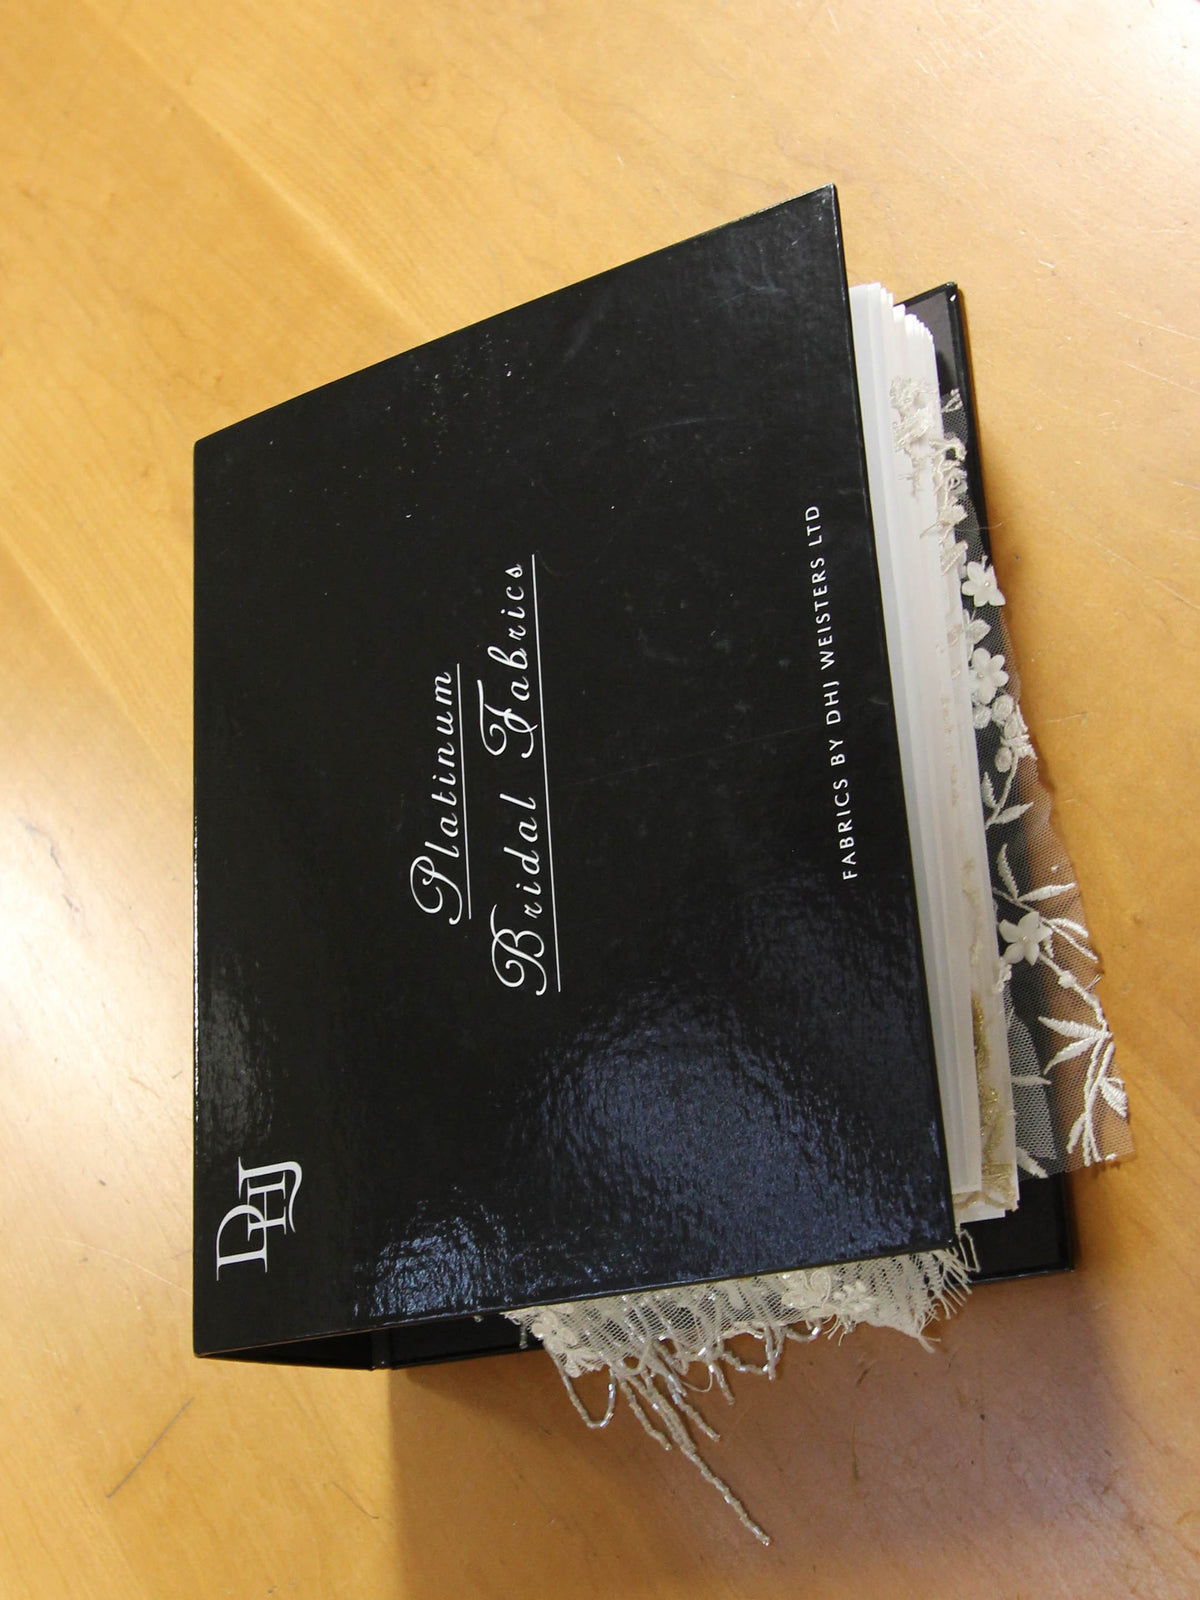 Sample Books of Lace (Volumes 1-49)